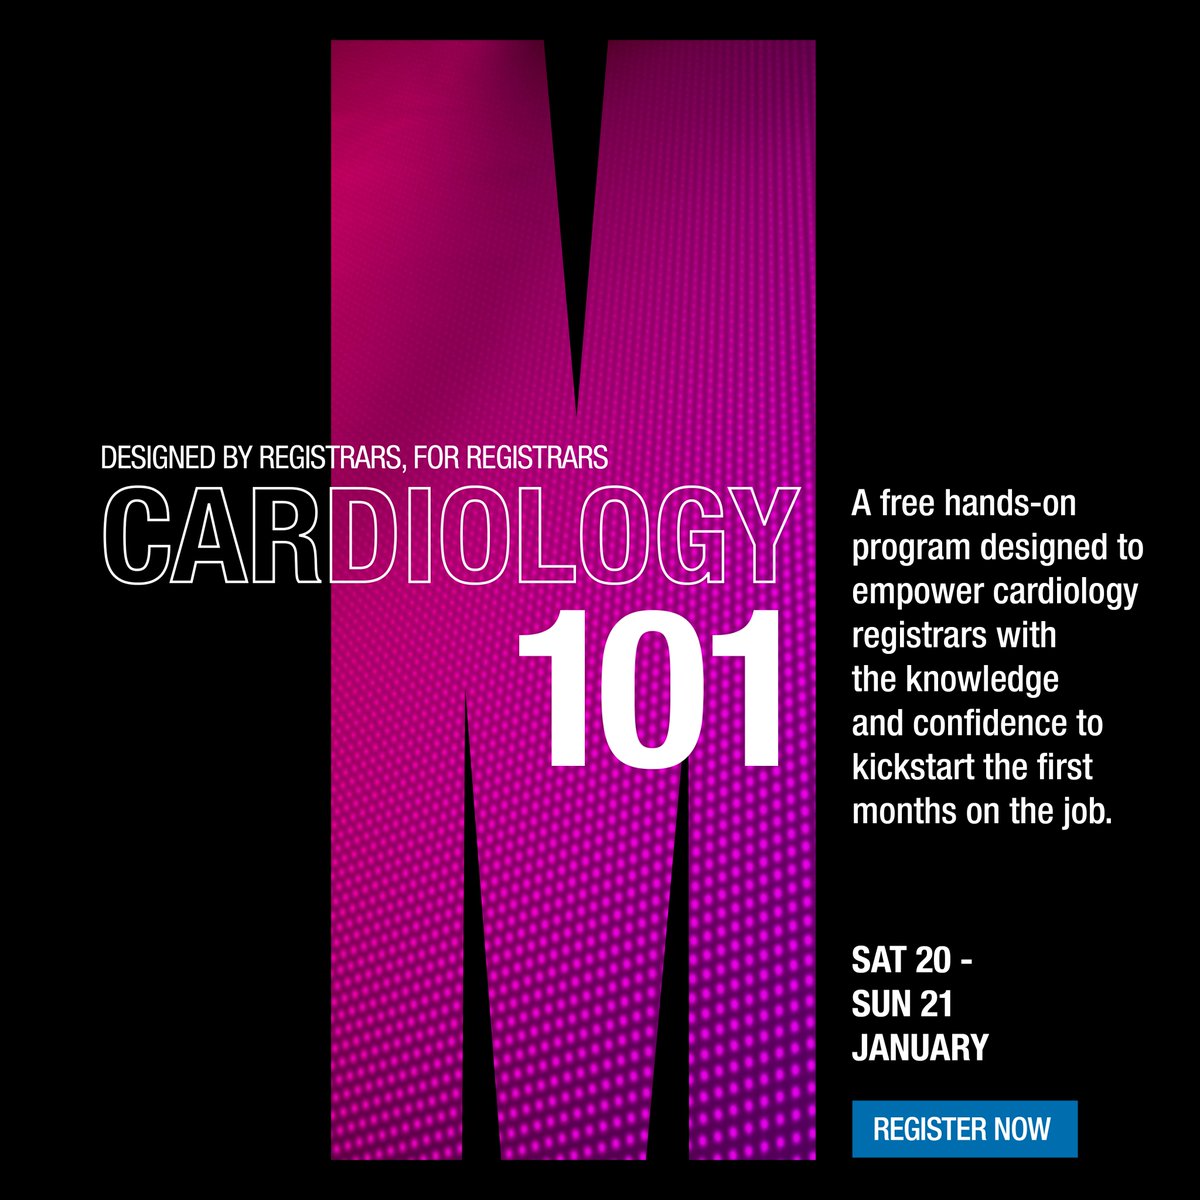 Entering your first year of advanced cardiology training and want to prepare for the year ahead? Introducing Cardiology 101 - our hands-on program at the Victorian Heart Hospital Jan 20-21 designed by registrars, for registrars. Learn more + register: bit.ly/Cardiology101